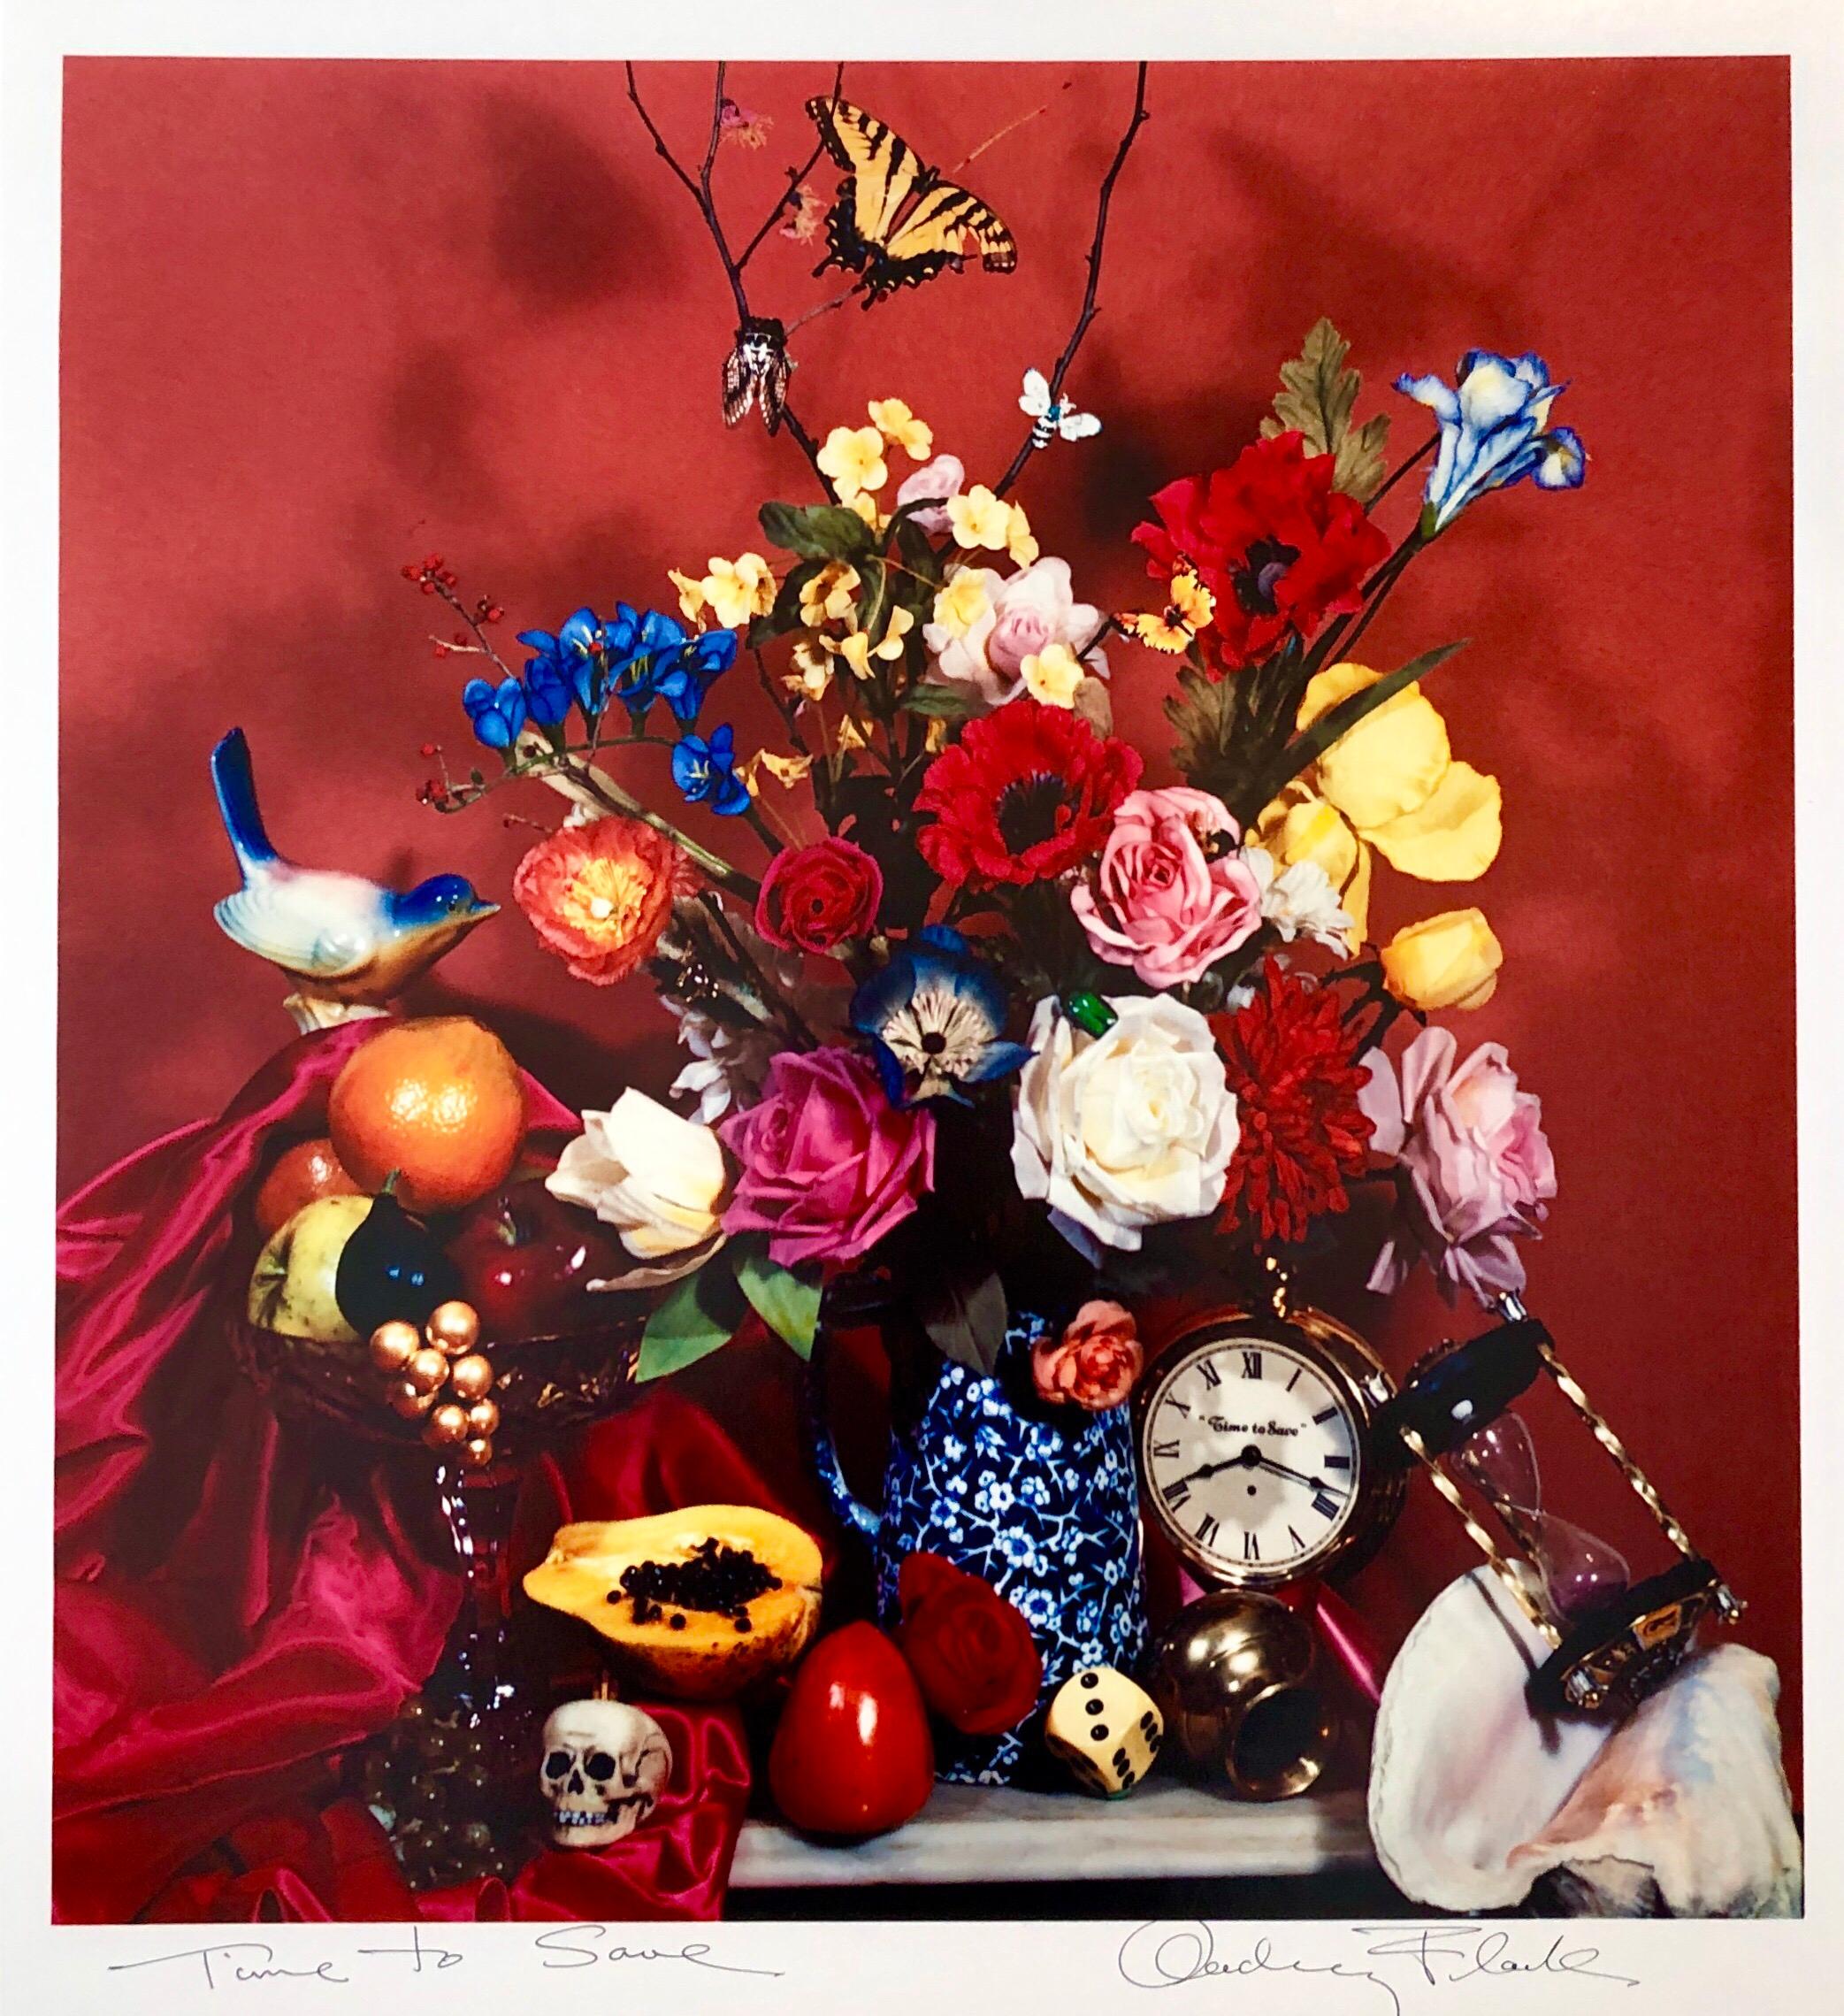 Hand signed and titled in ink by the artist from edition of 50 (plus proofs). Color Photo printed at CVI Lab by master printer Guy Stricherz. Published by Prestige Art Ltd. From the color saturated 1980's. "Time to Save" featuring a delcate